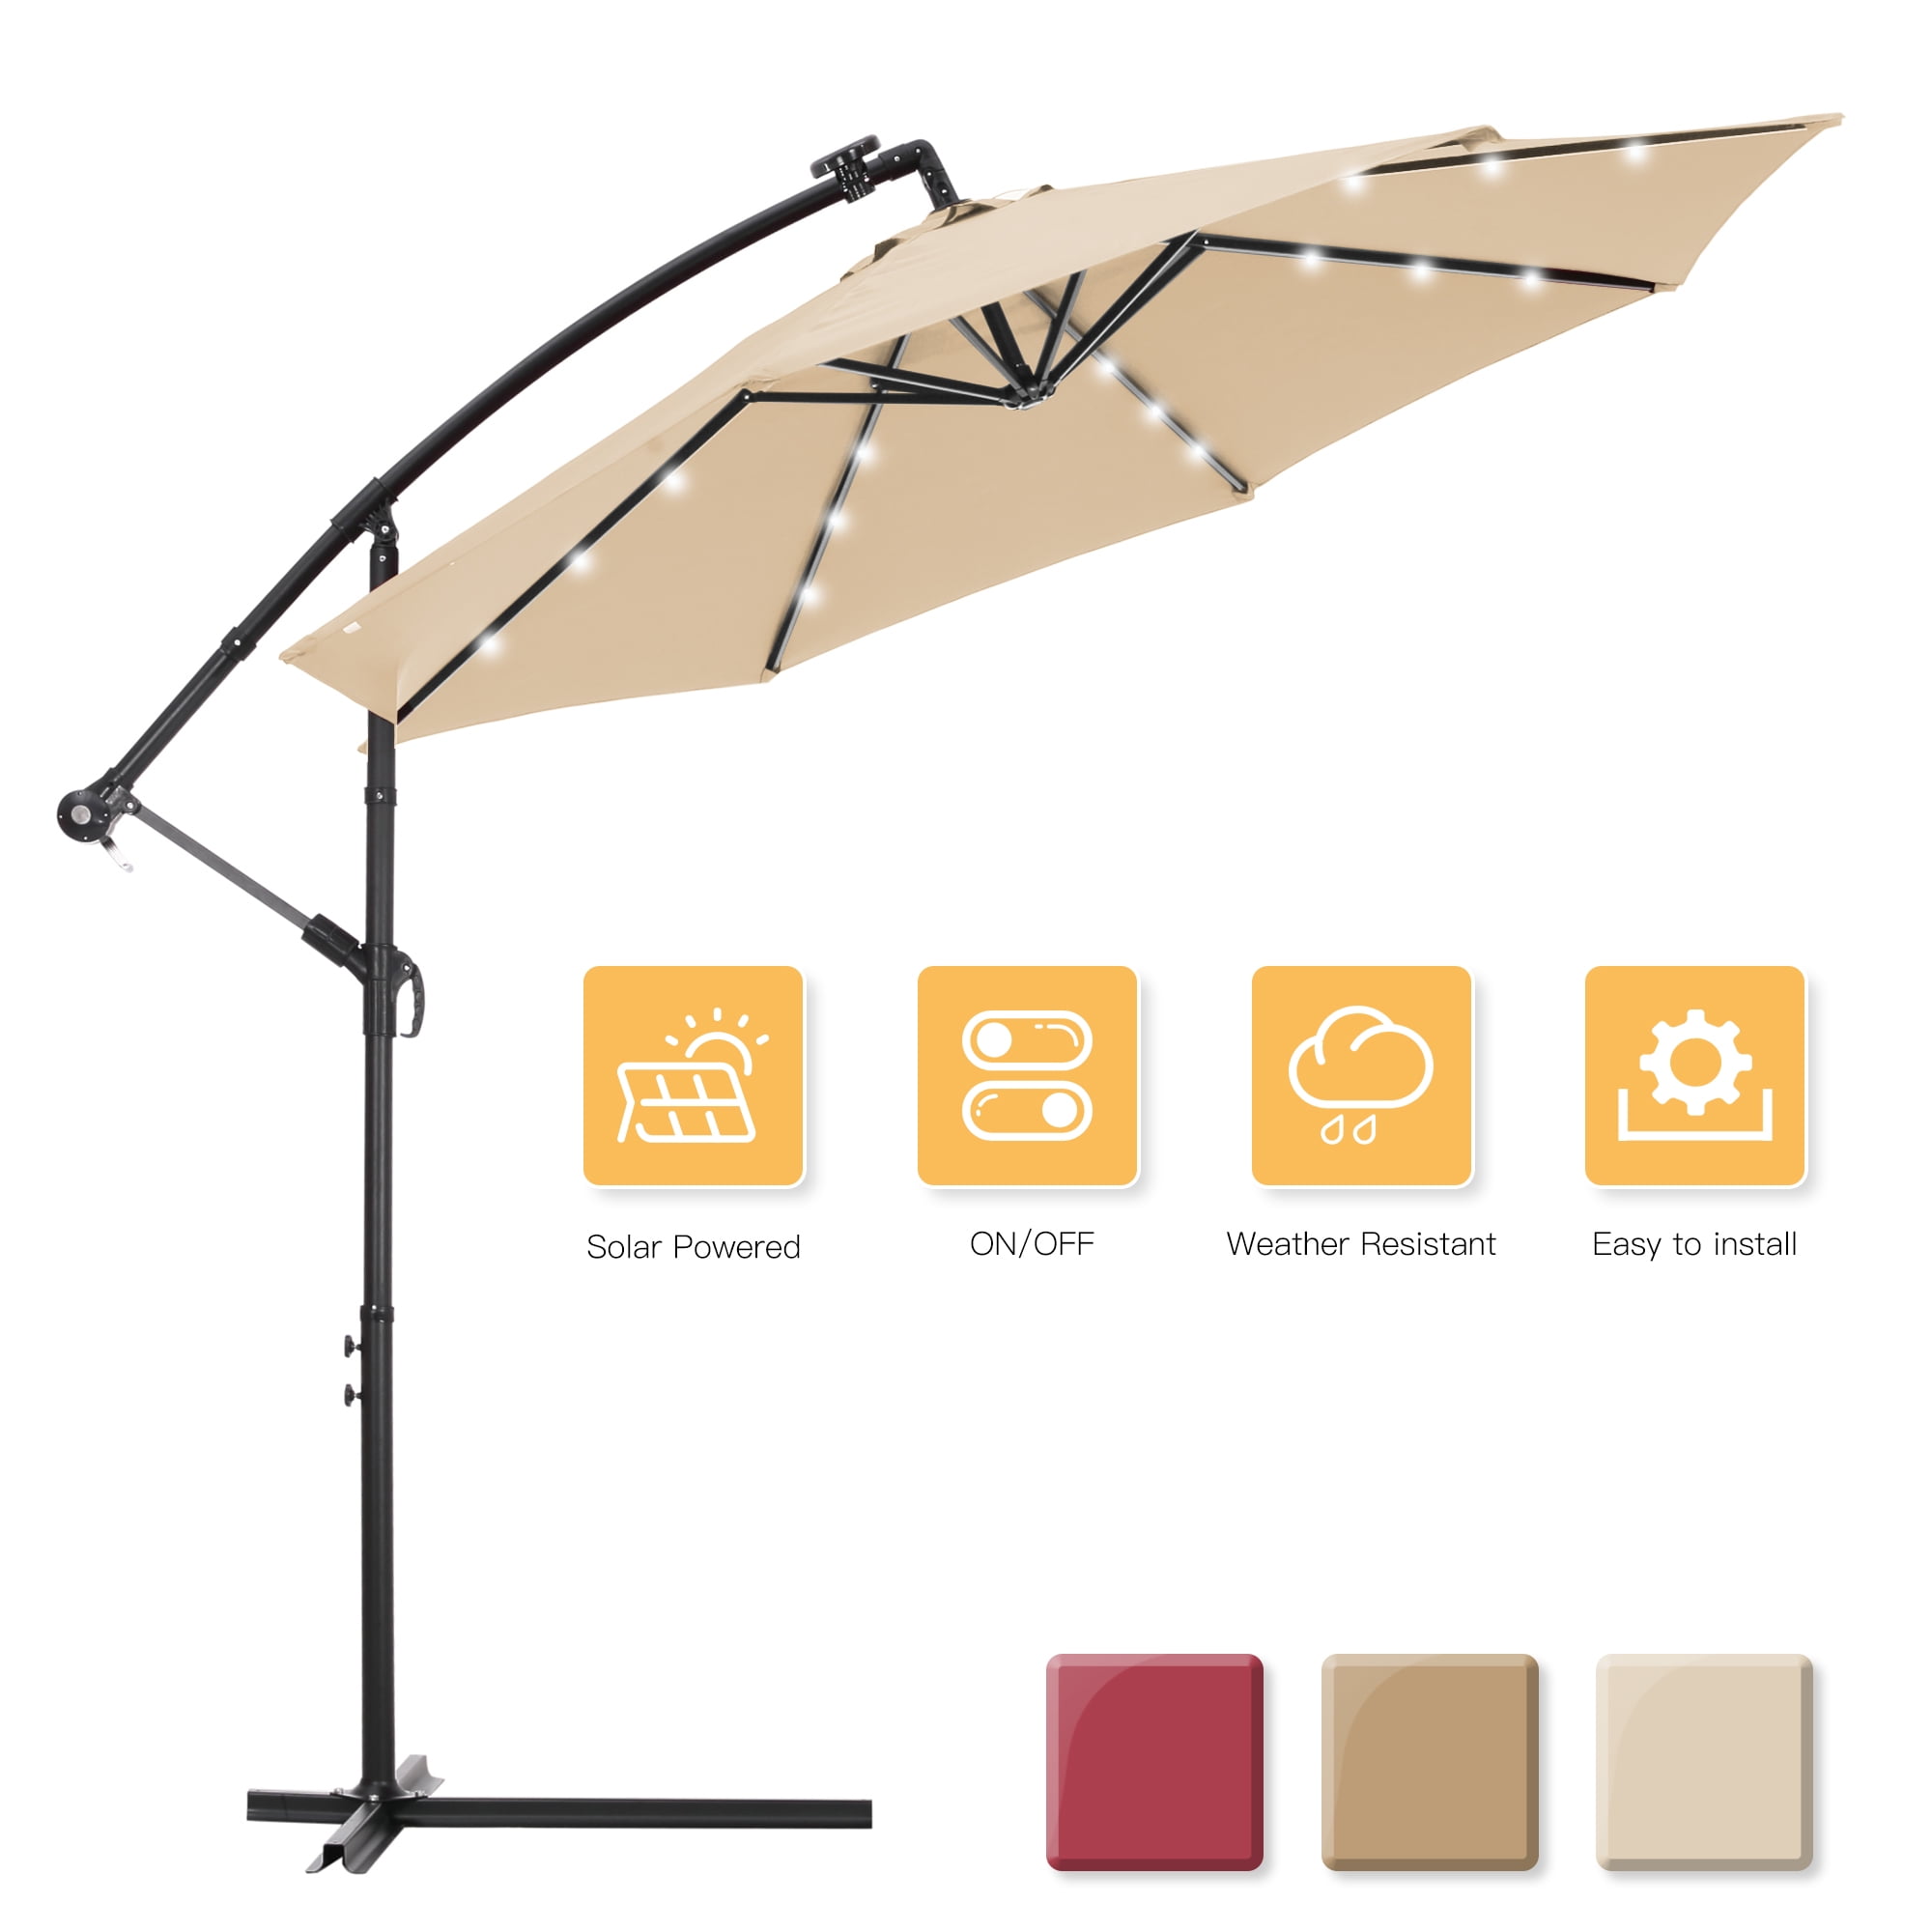 Details about   10 ft Hanging Sun Umbrella Patio Sun Shade Offset Outdoor Market with Crank Base 